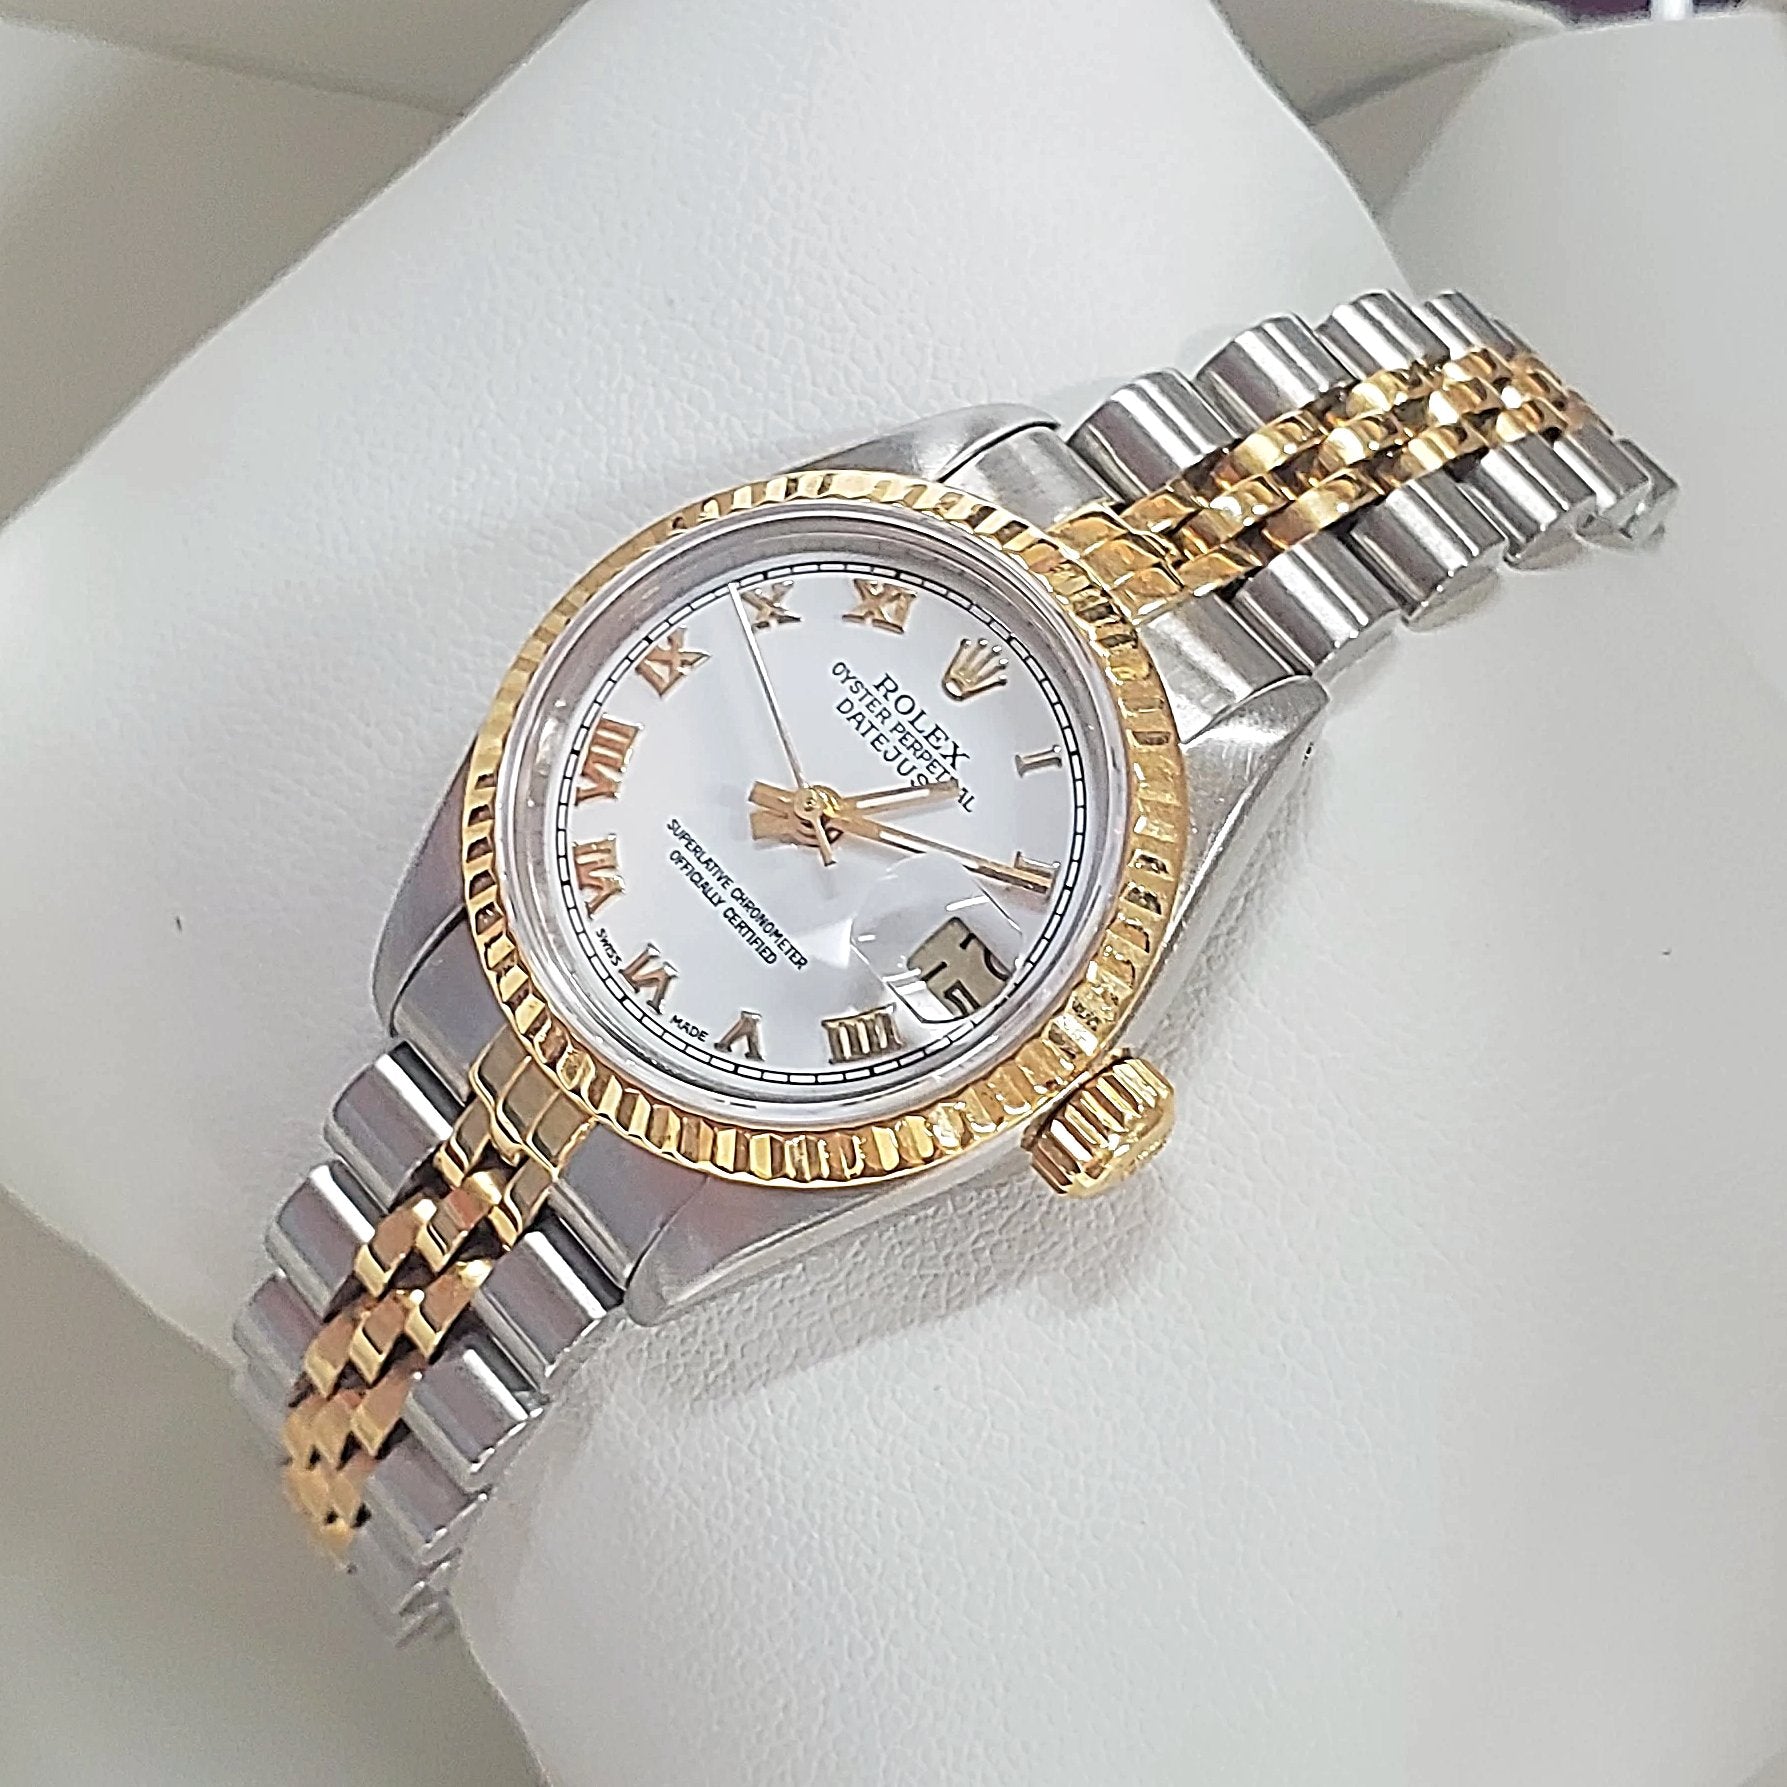 Women's Rolex 18K Gold 26mm Two-Tone DateJust Watch, with Fluted Bezel, White Dial, and Roman Numerals.